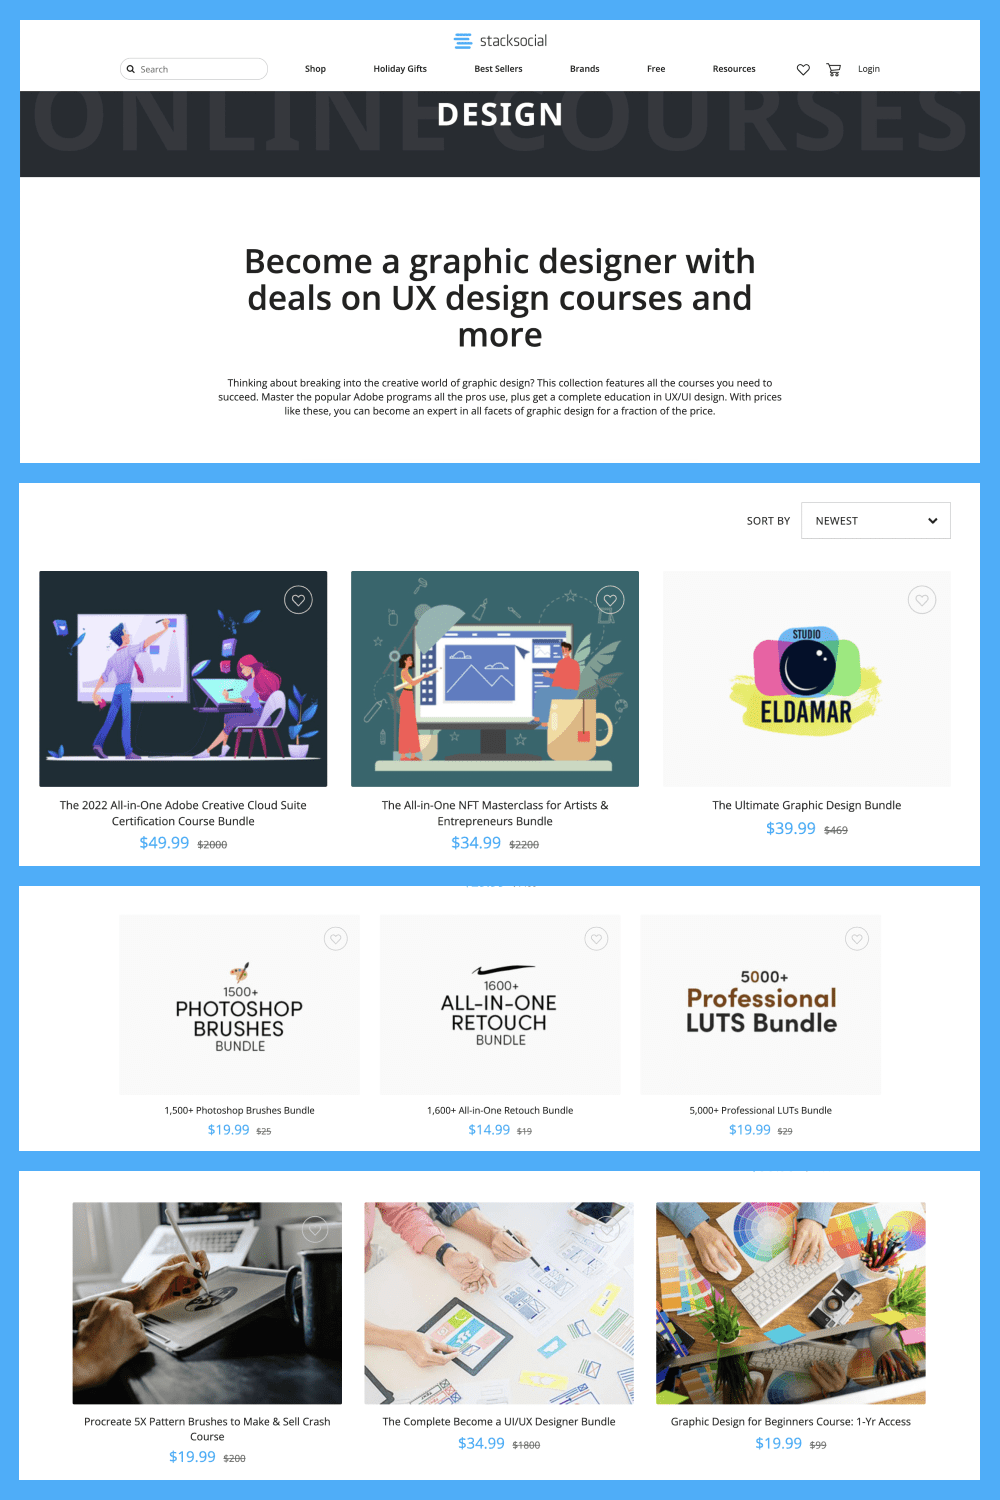 StackSocial Master Classes and Training for Designers.